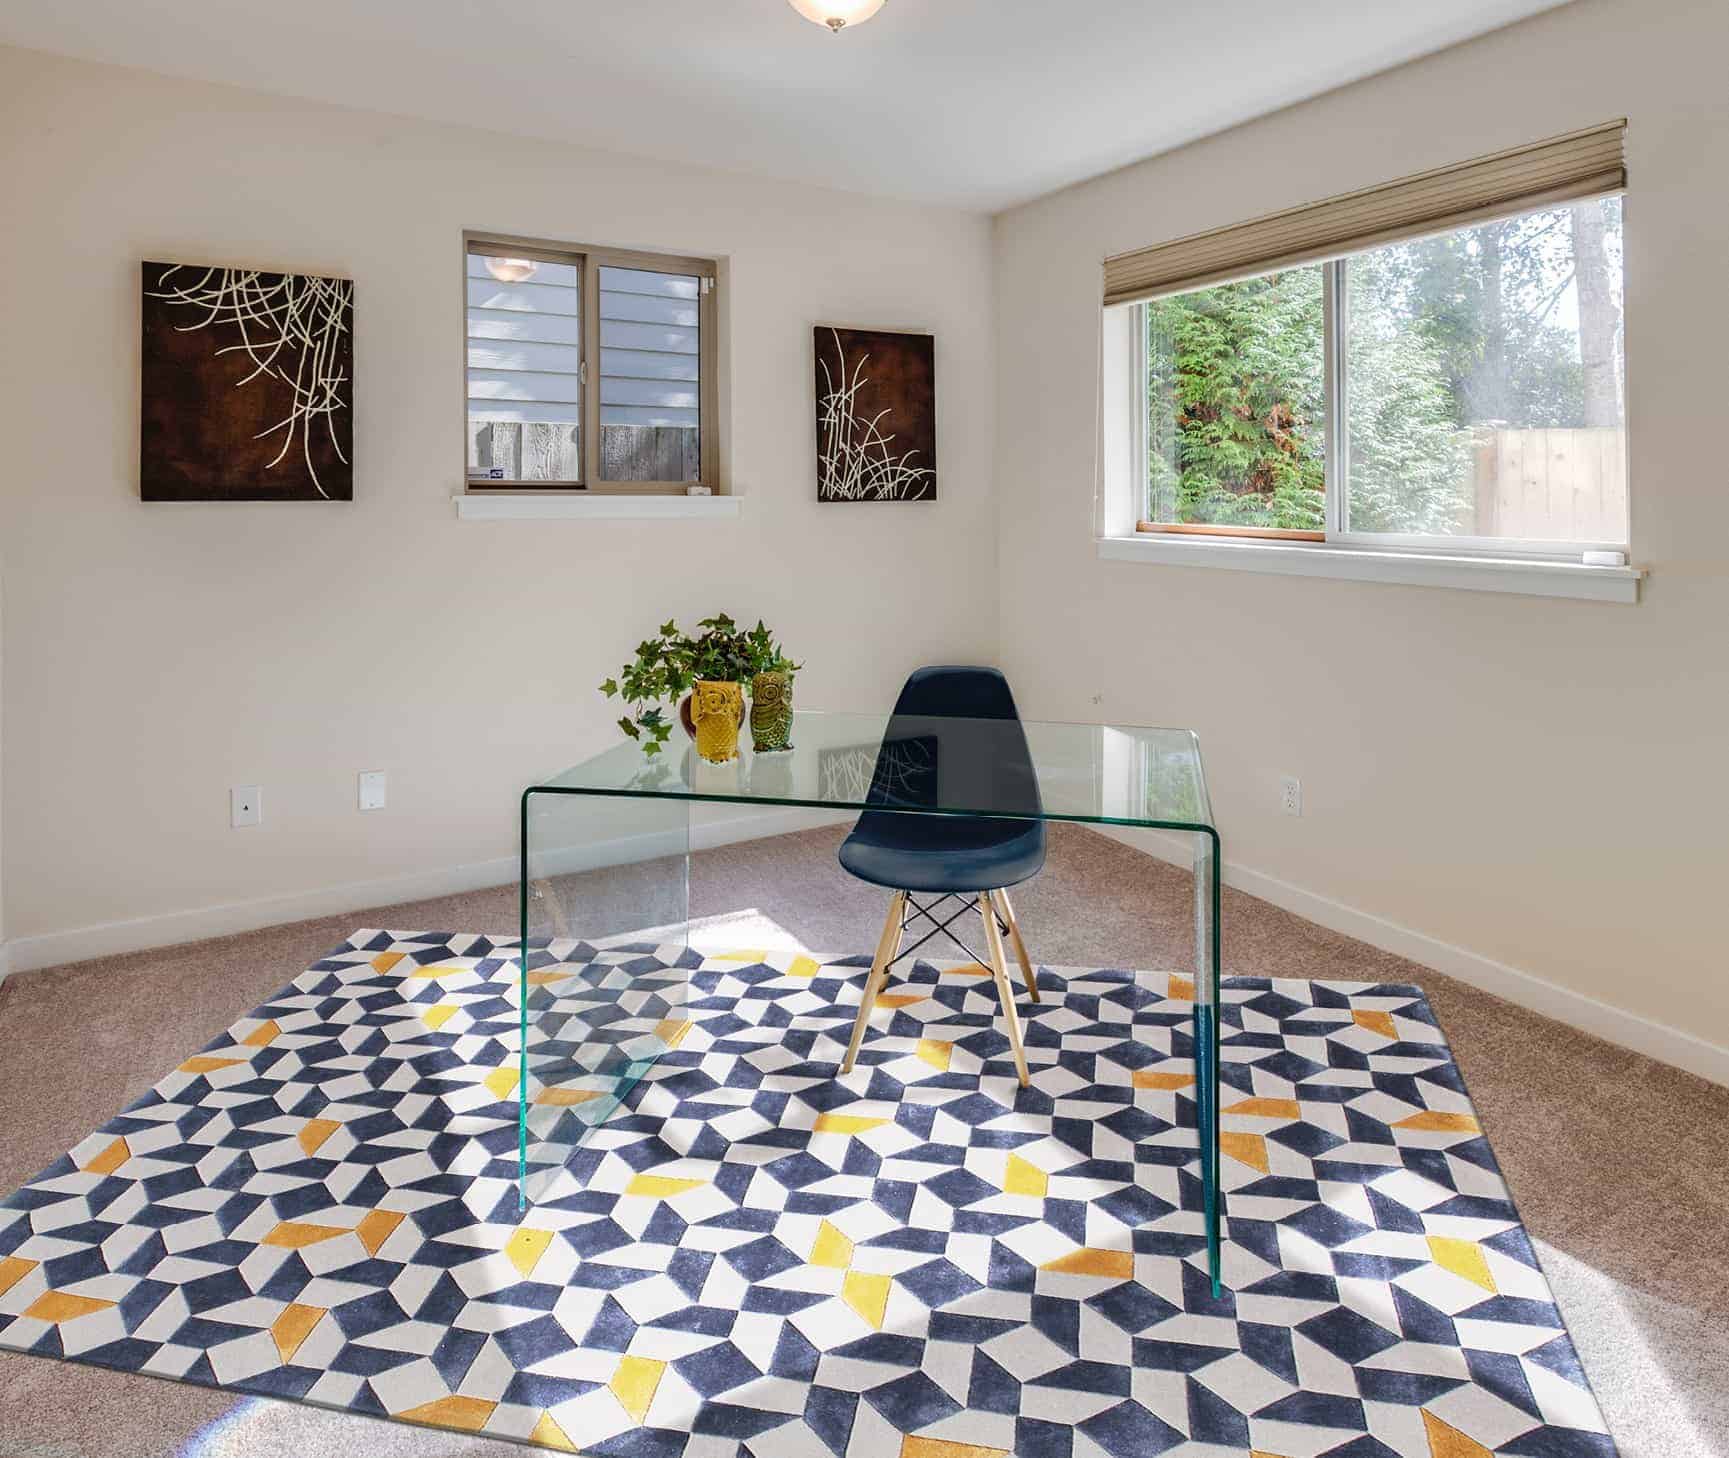 geometric pattern type carpet in living room with a black chair